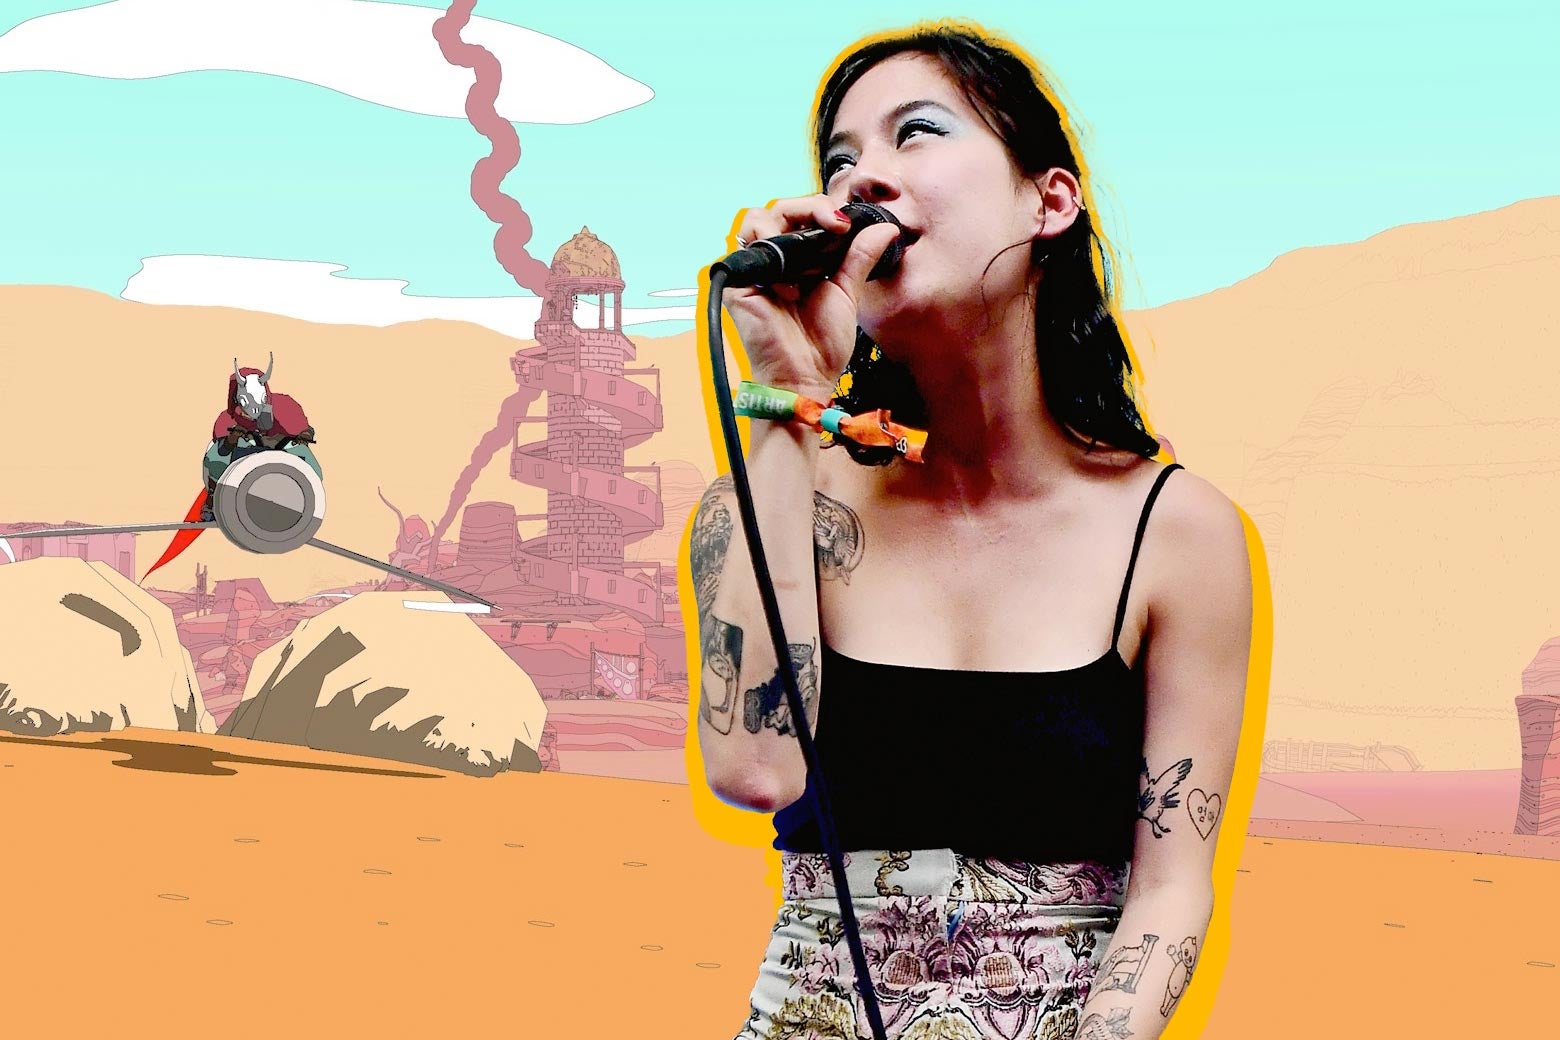 Michelle Zauner sings into a microphone. In the background is an image from the Sable video game.